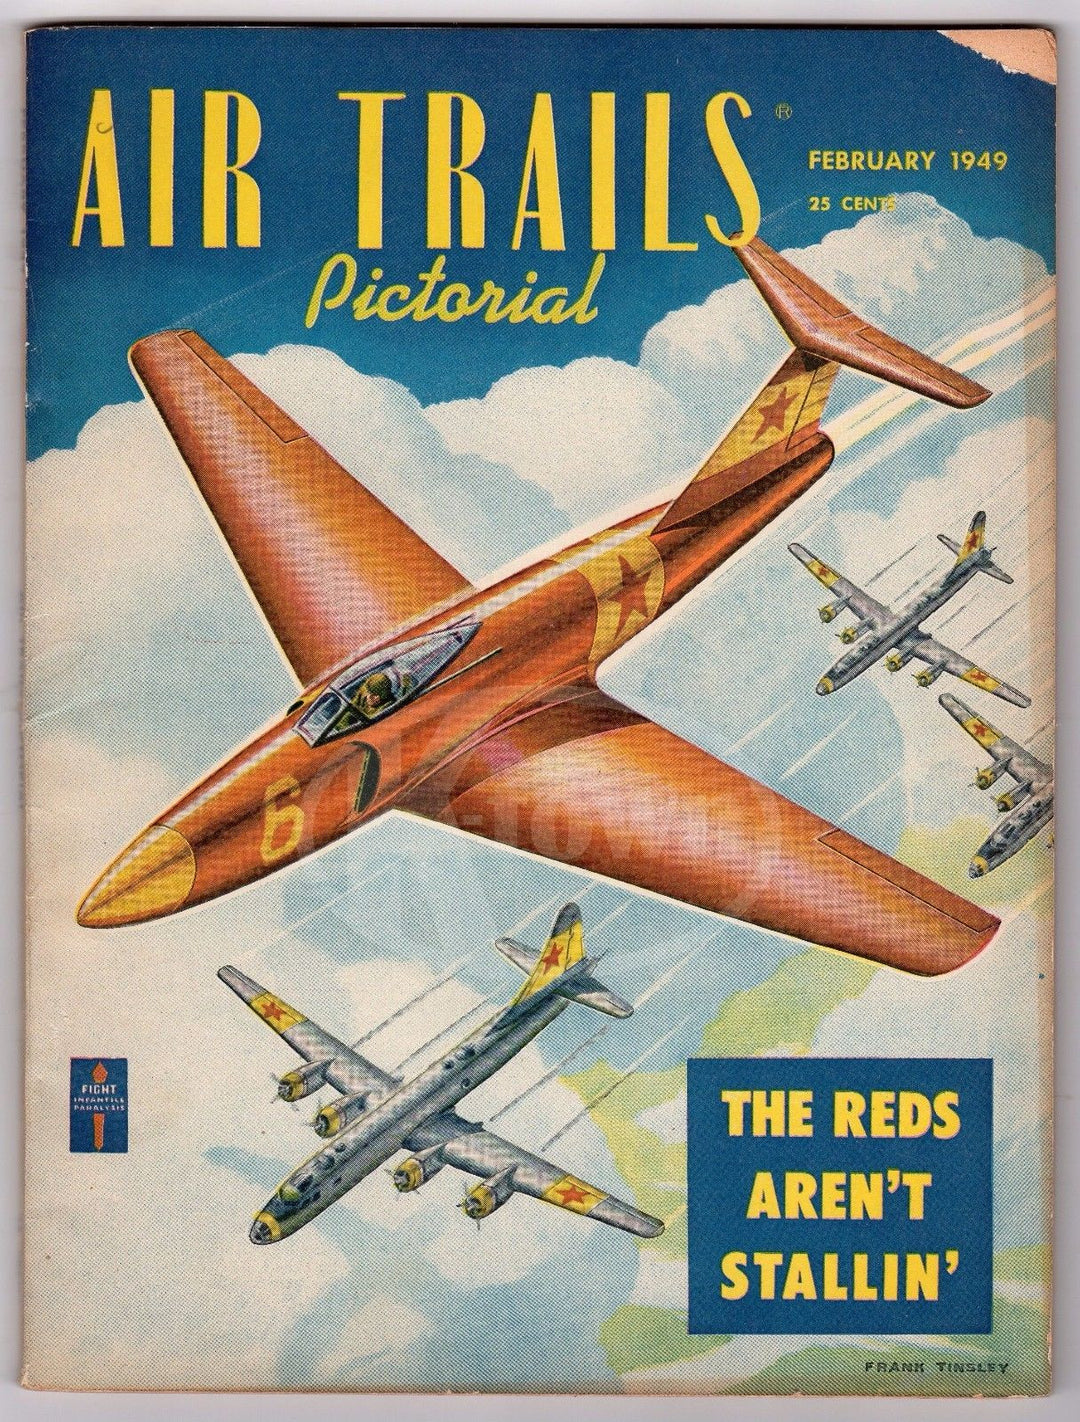 AIR TRAILS ANTIQUE GRAPHIC AVIATION MAGAZINE JAGUAR FIGHTER AIRPLANE POSTER 1949 - K-townConsignments